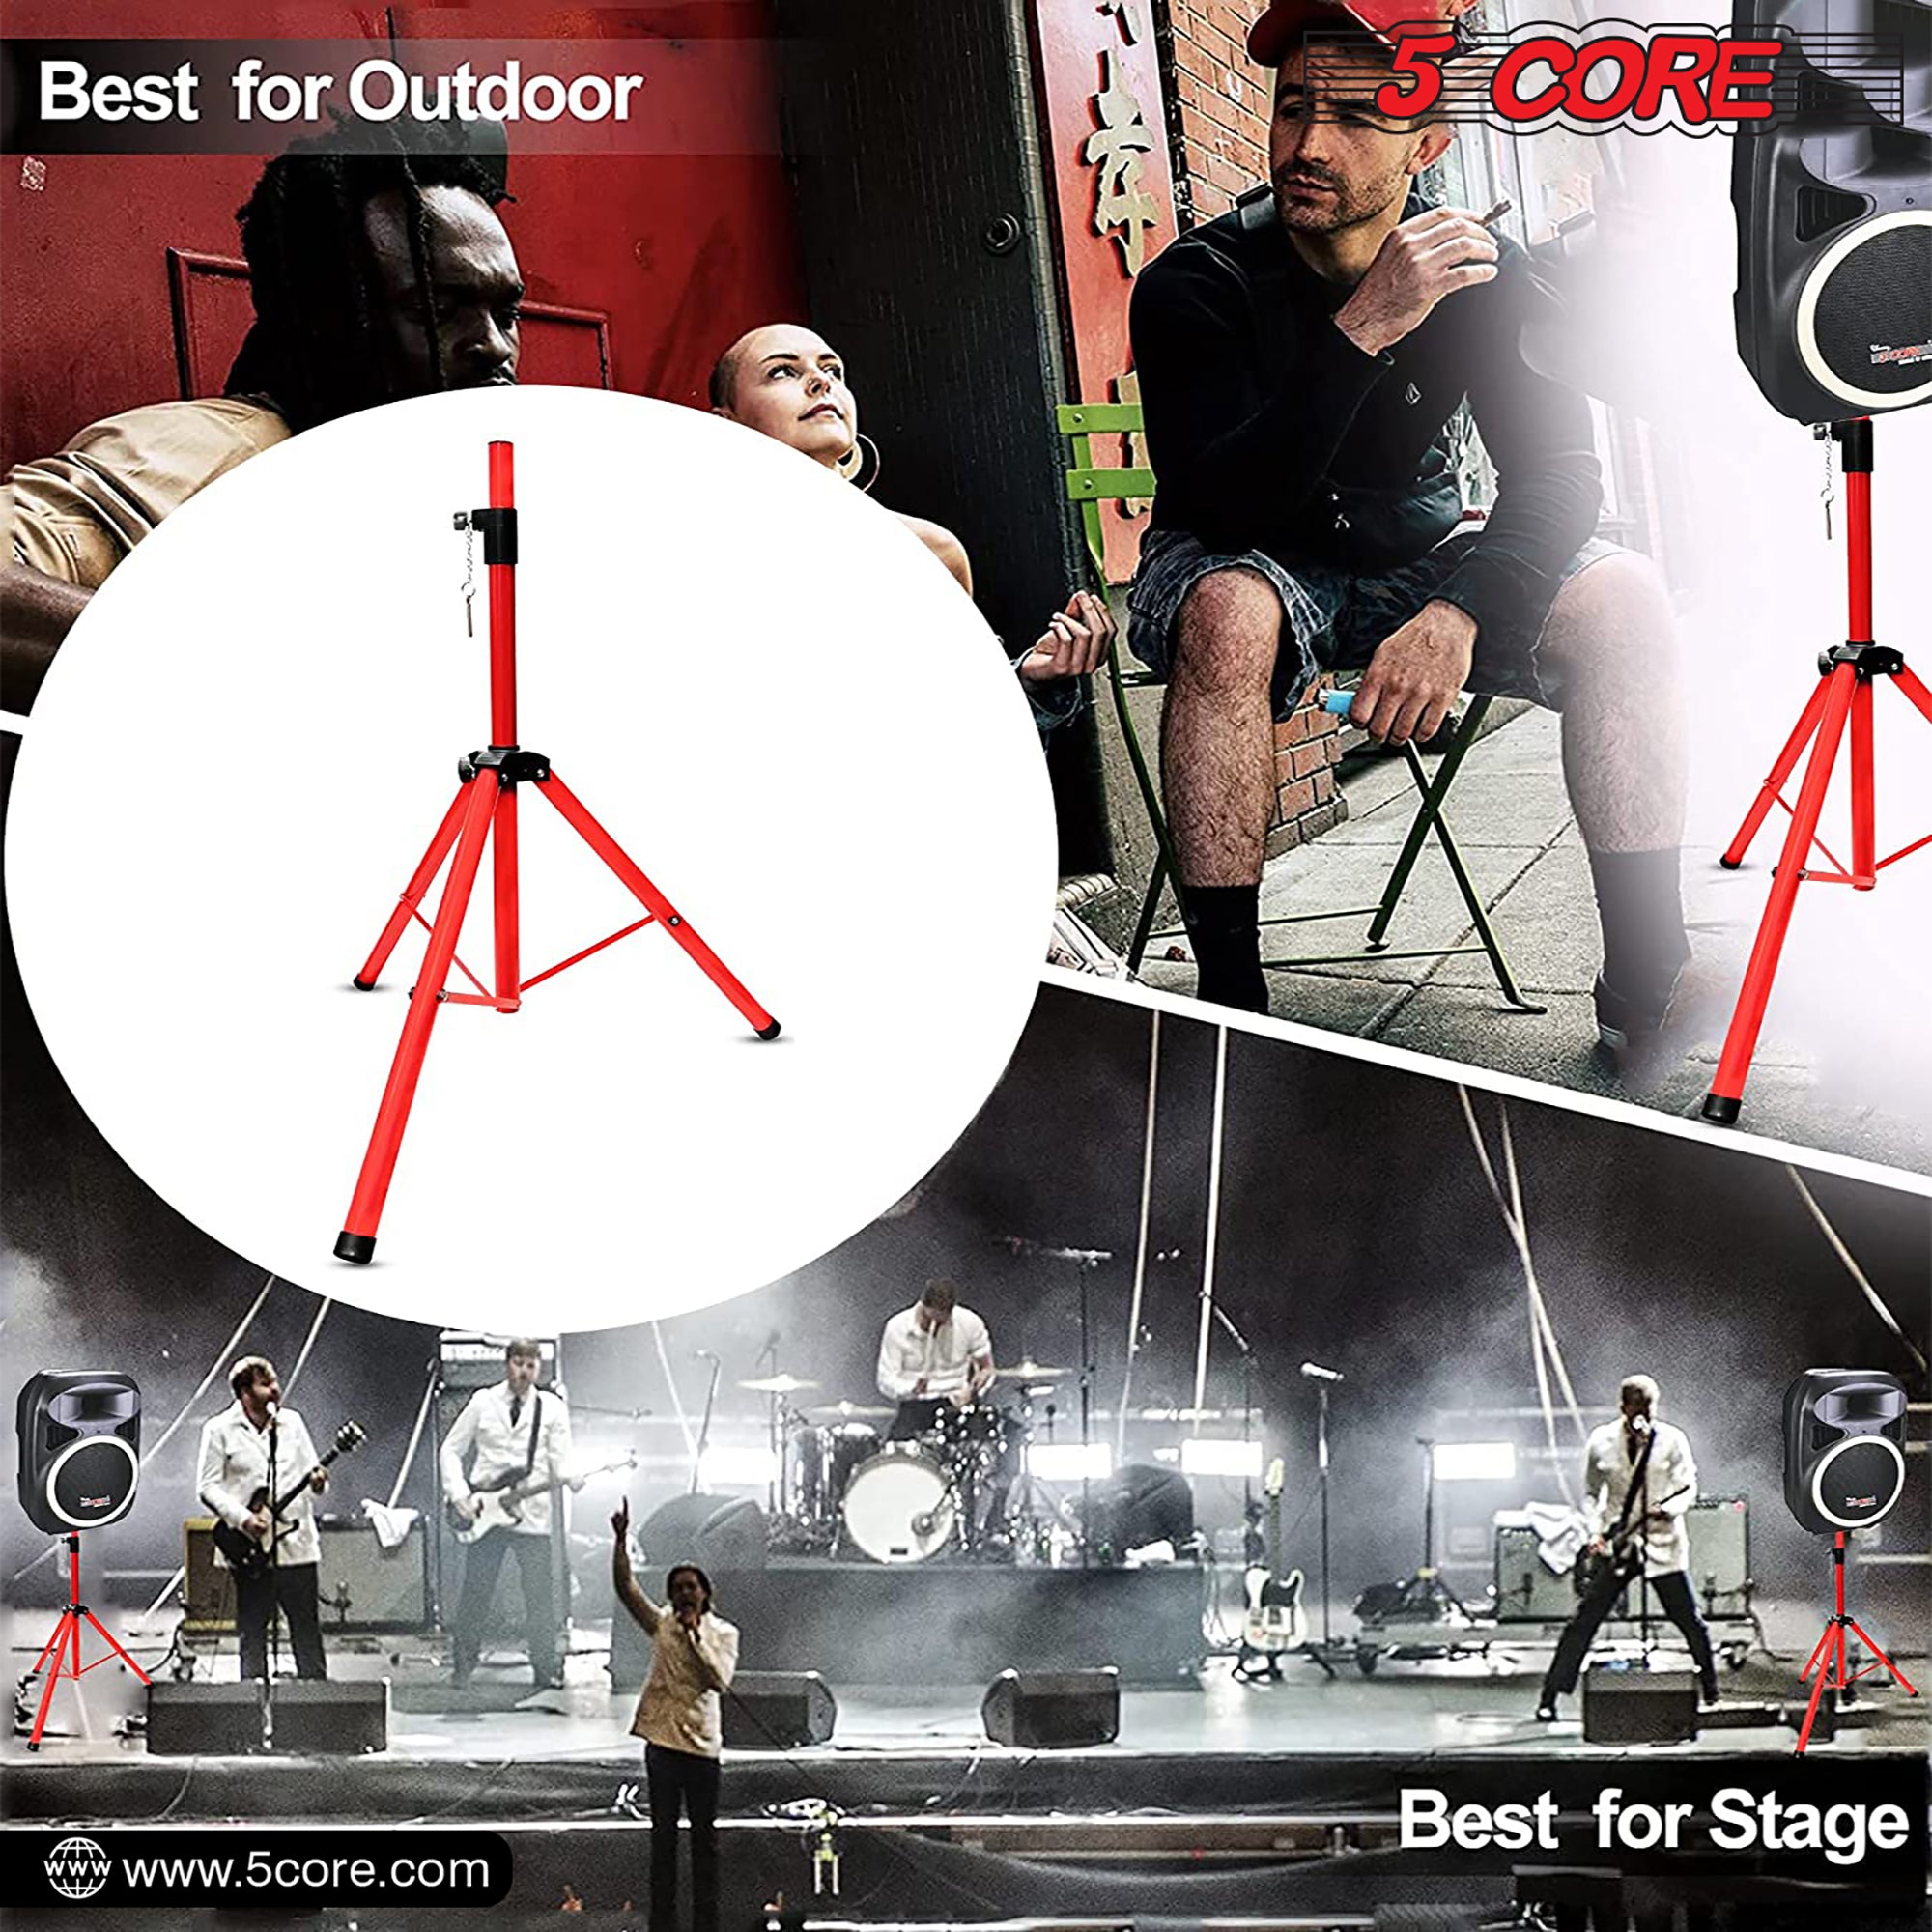 5 Core speaker Stand 2 Pieces Subwoofer Stands Red Height Adjustable Light Weight Studio PA Speaker Holder for Large Speakers w Locking Safety PIN and 35mm Compatible Insert On Stage In Studio Use - SS ECO 2PK RED WoB